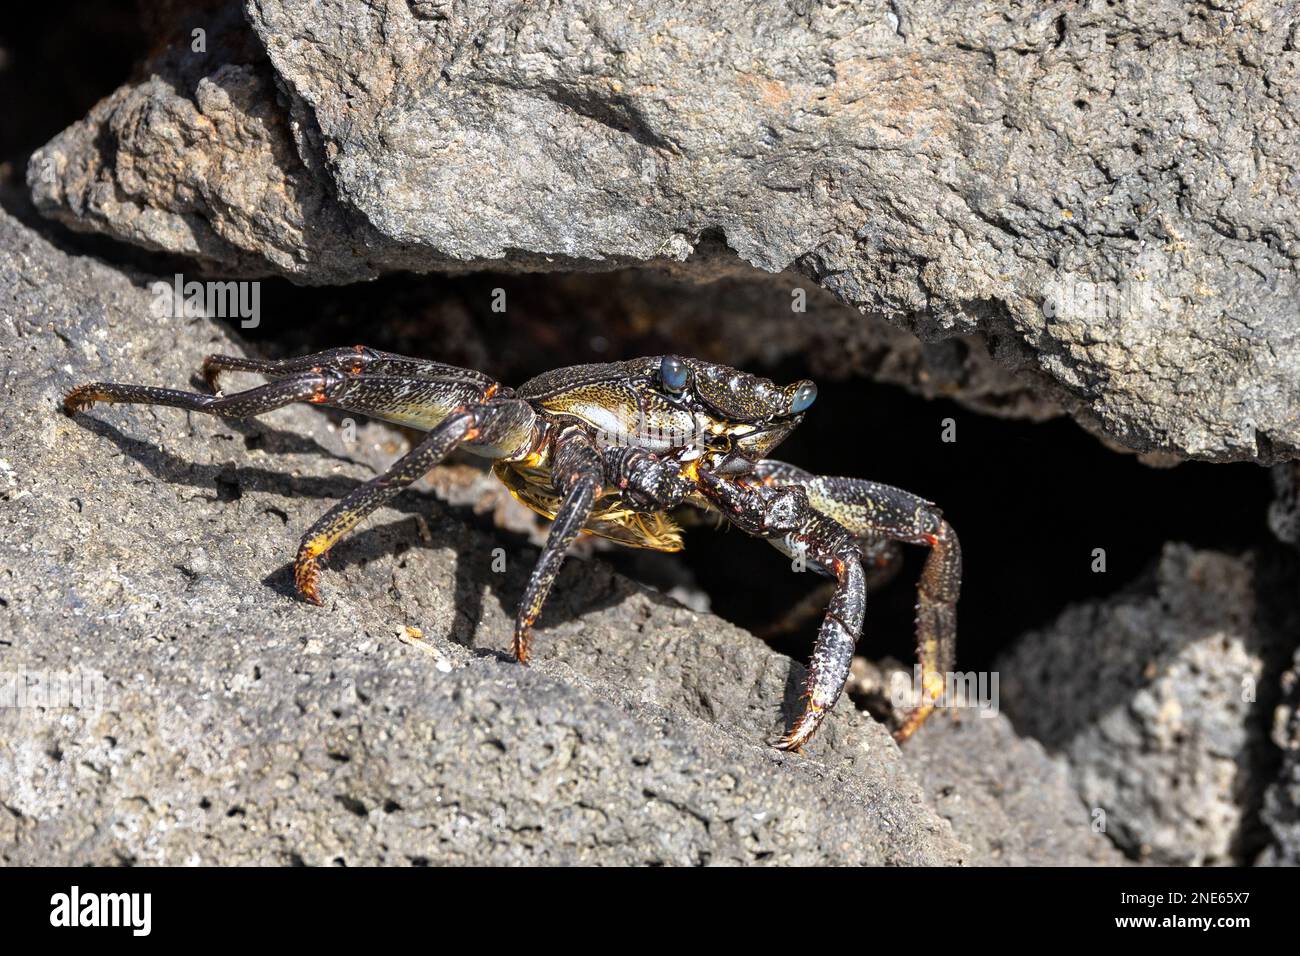 Eastern Atlantic Sally lightfoot crab, Mottled shore crab (Grapsus adscensionis), juvenile on lava stones at the coast, Canary Islands, Lanzarote, Stock Photo